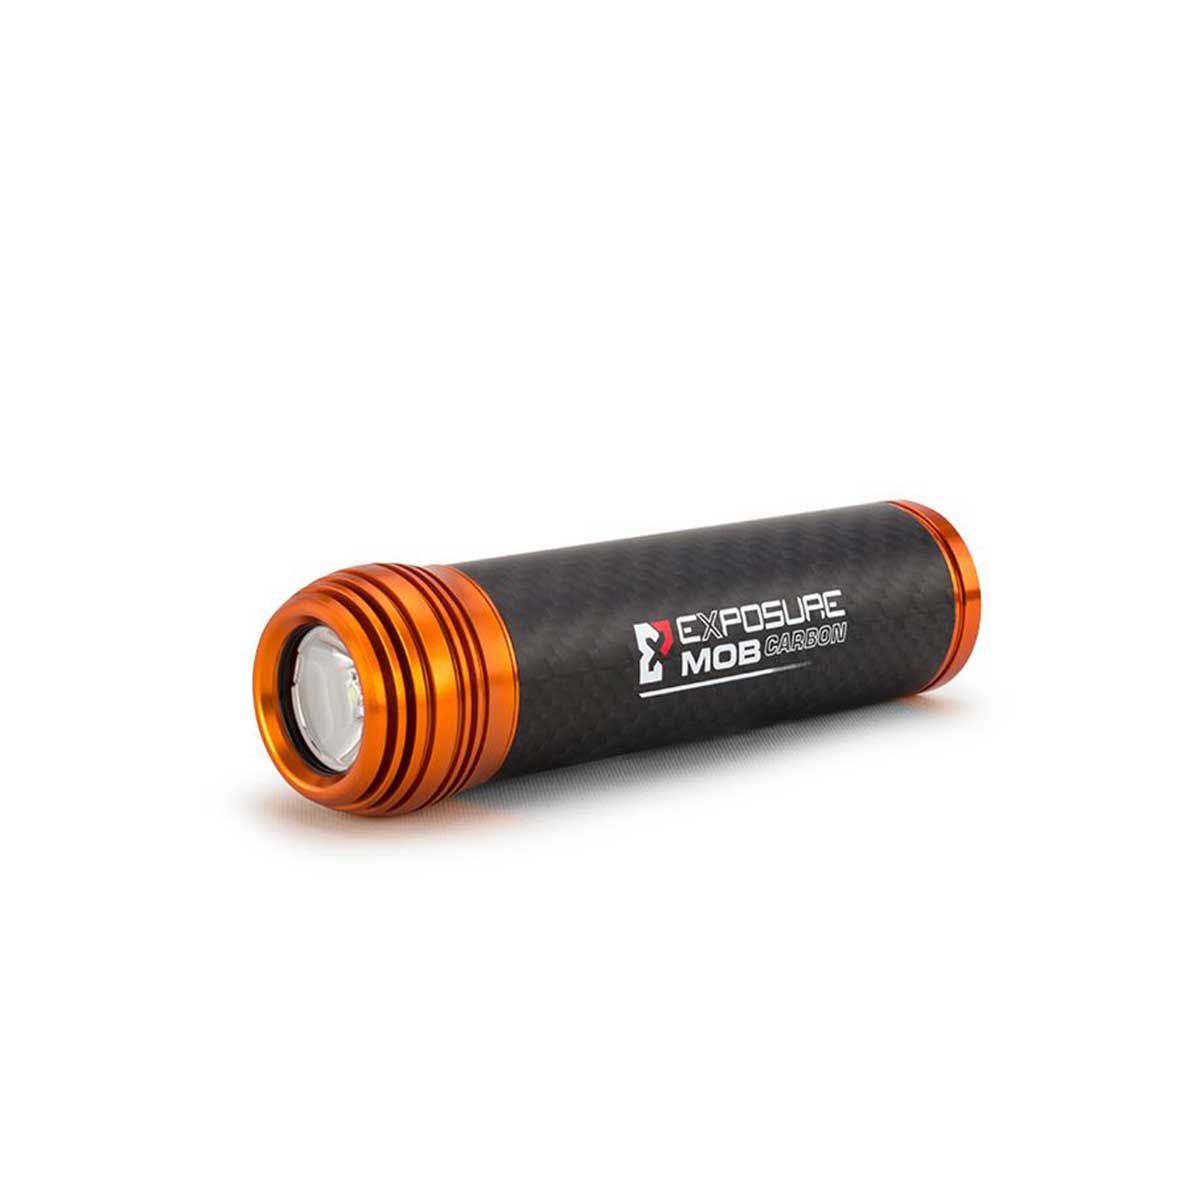 Exposure Lights MOB Carbon torch